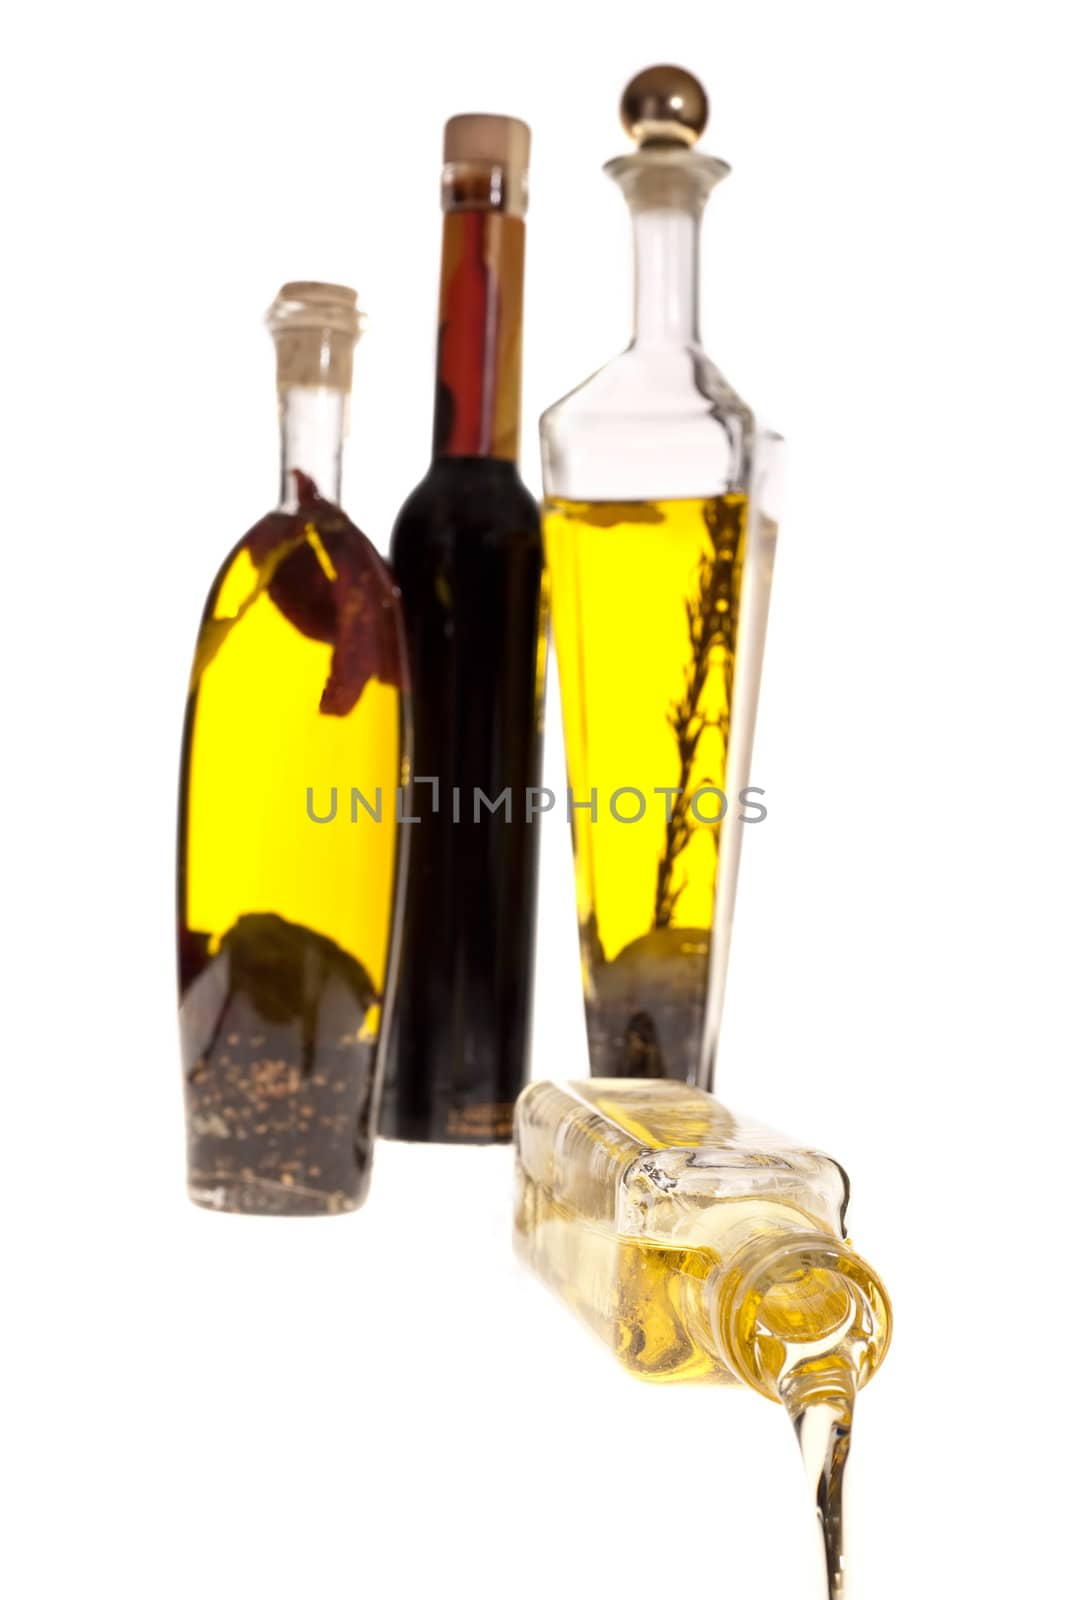 Oil pouring from the bottle image on white background